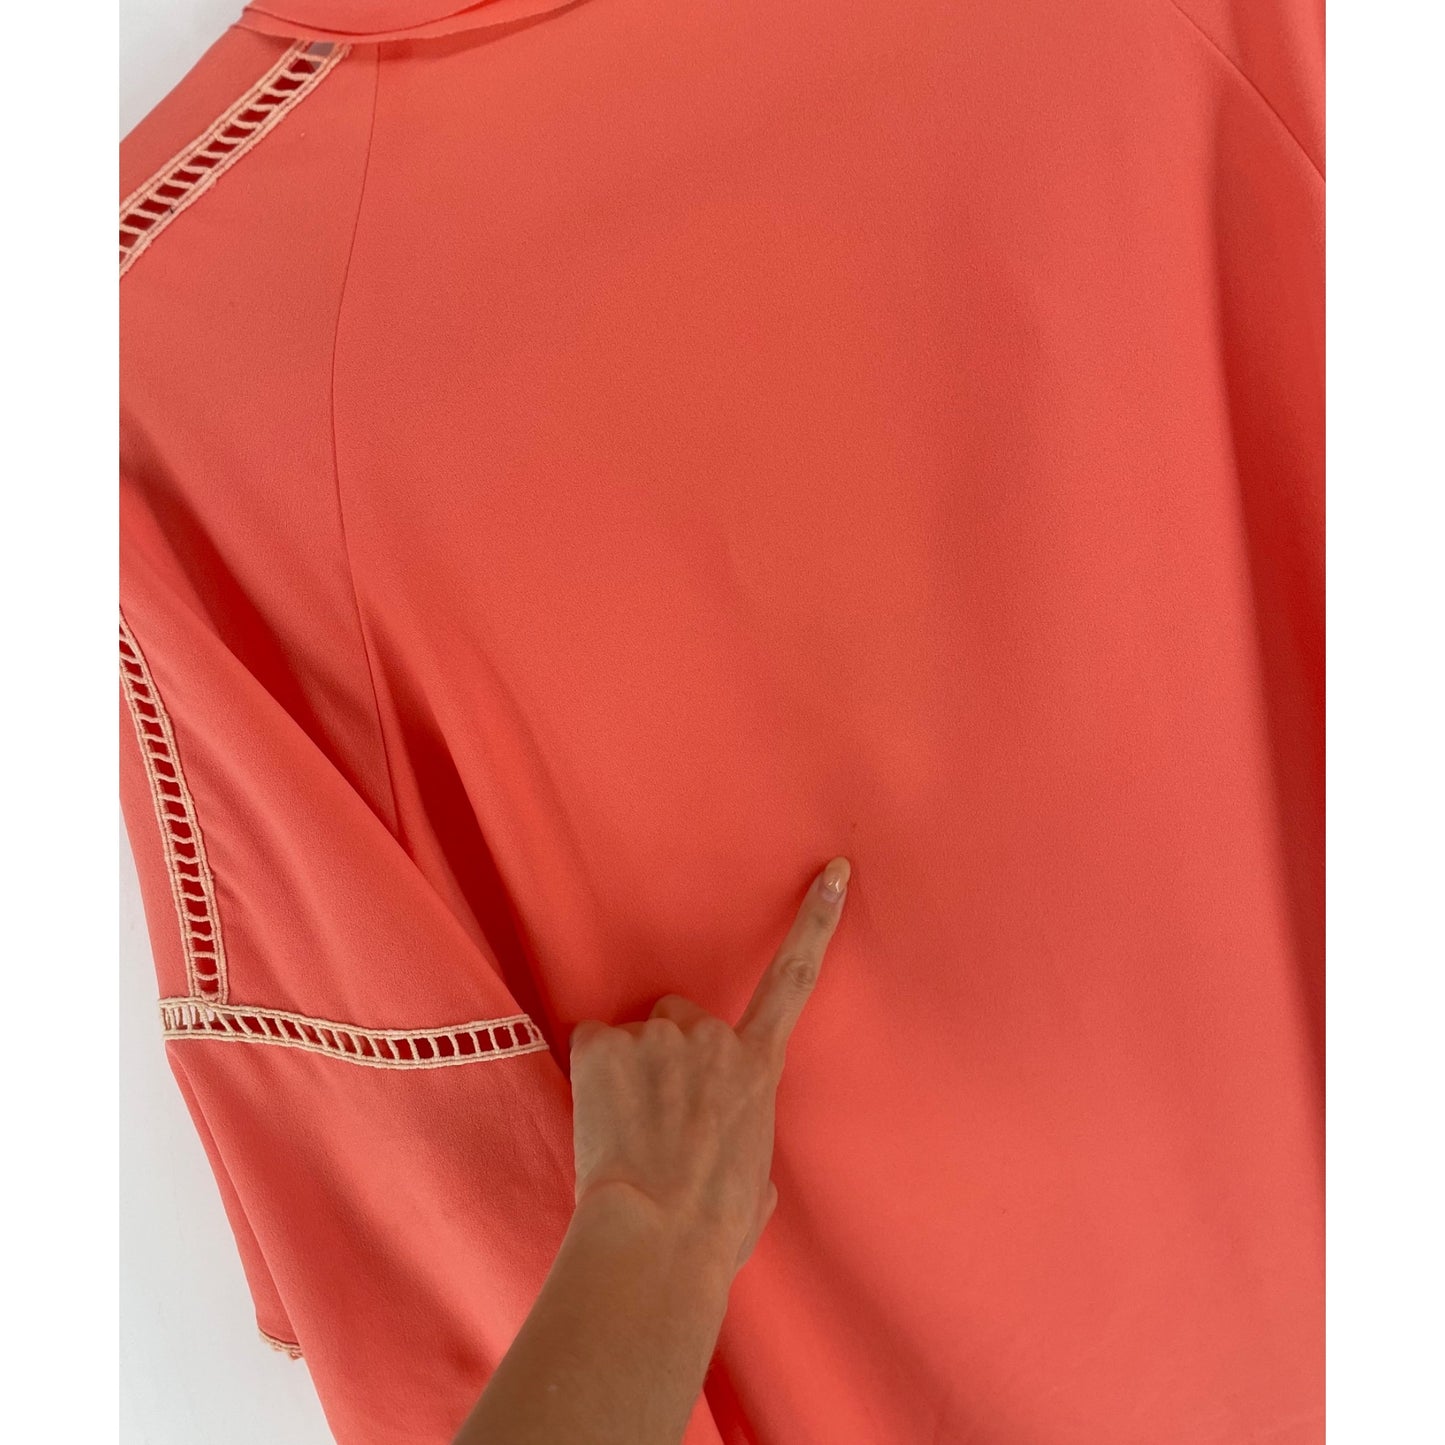 Kenneth Cole Women's Size XL Coral & Cream Bell Sleeve Blouse